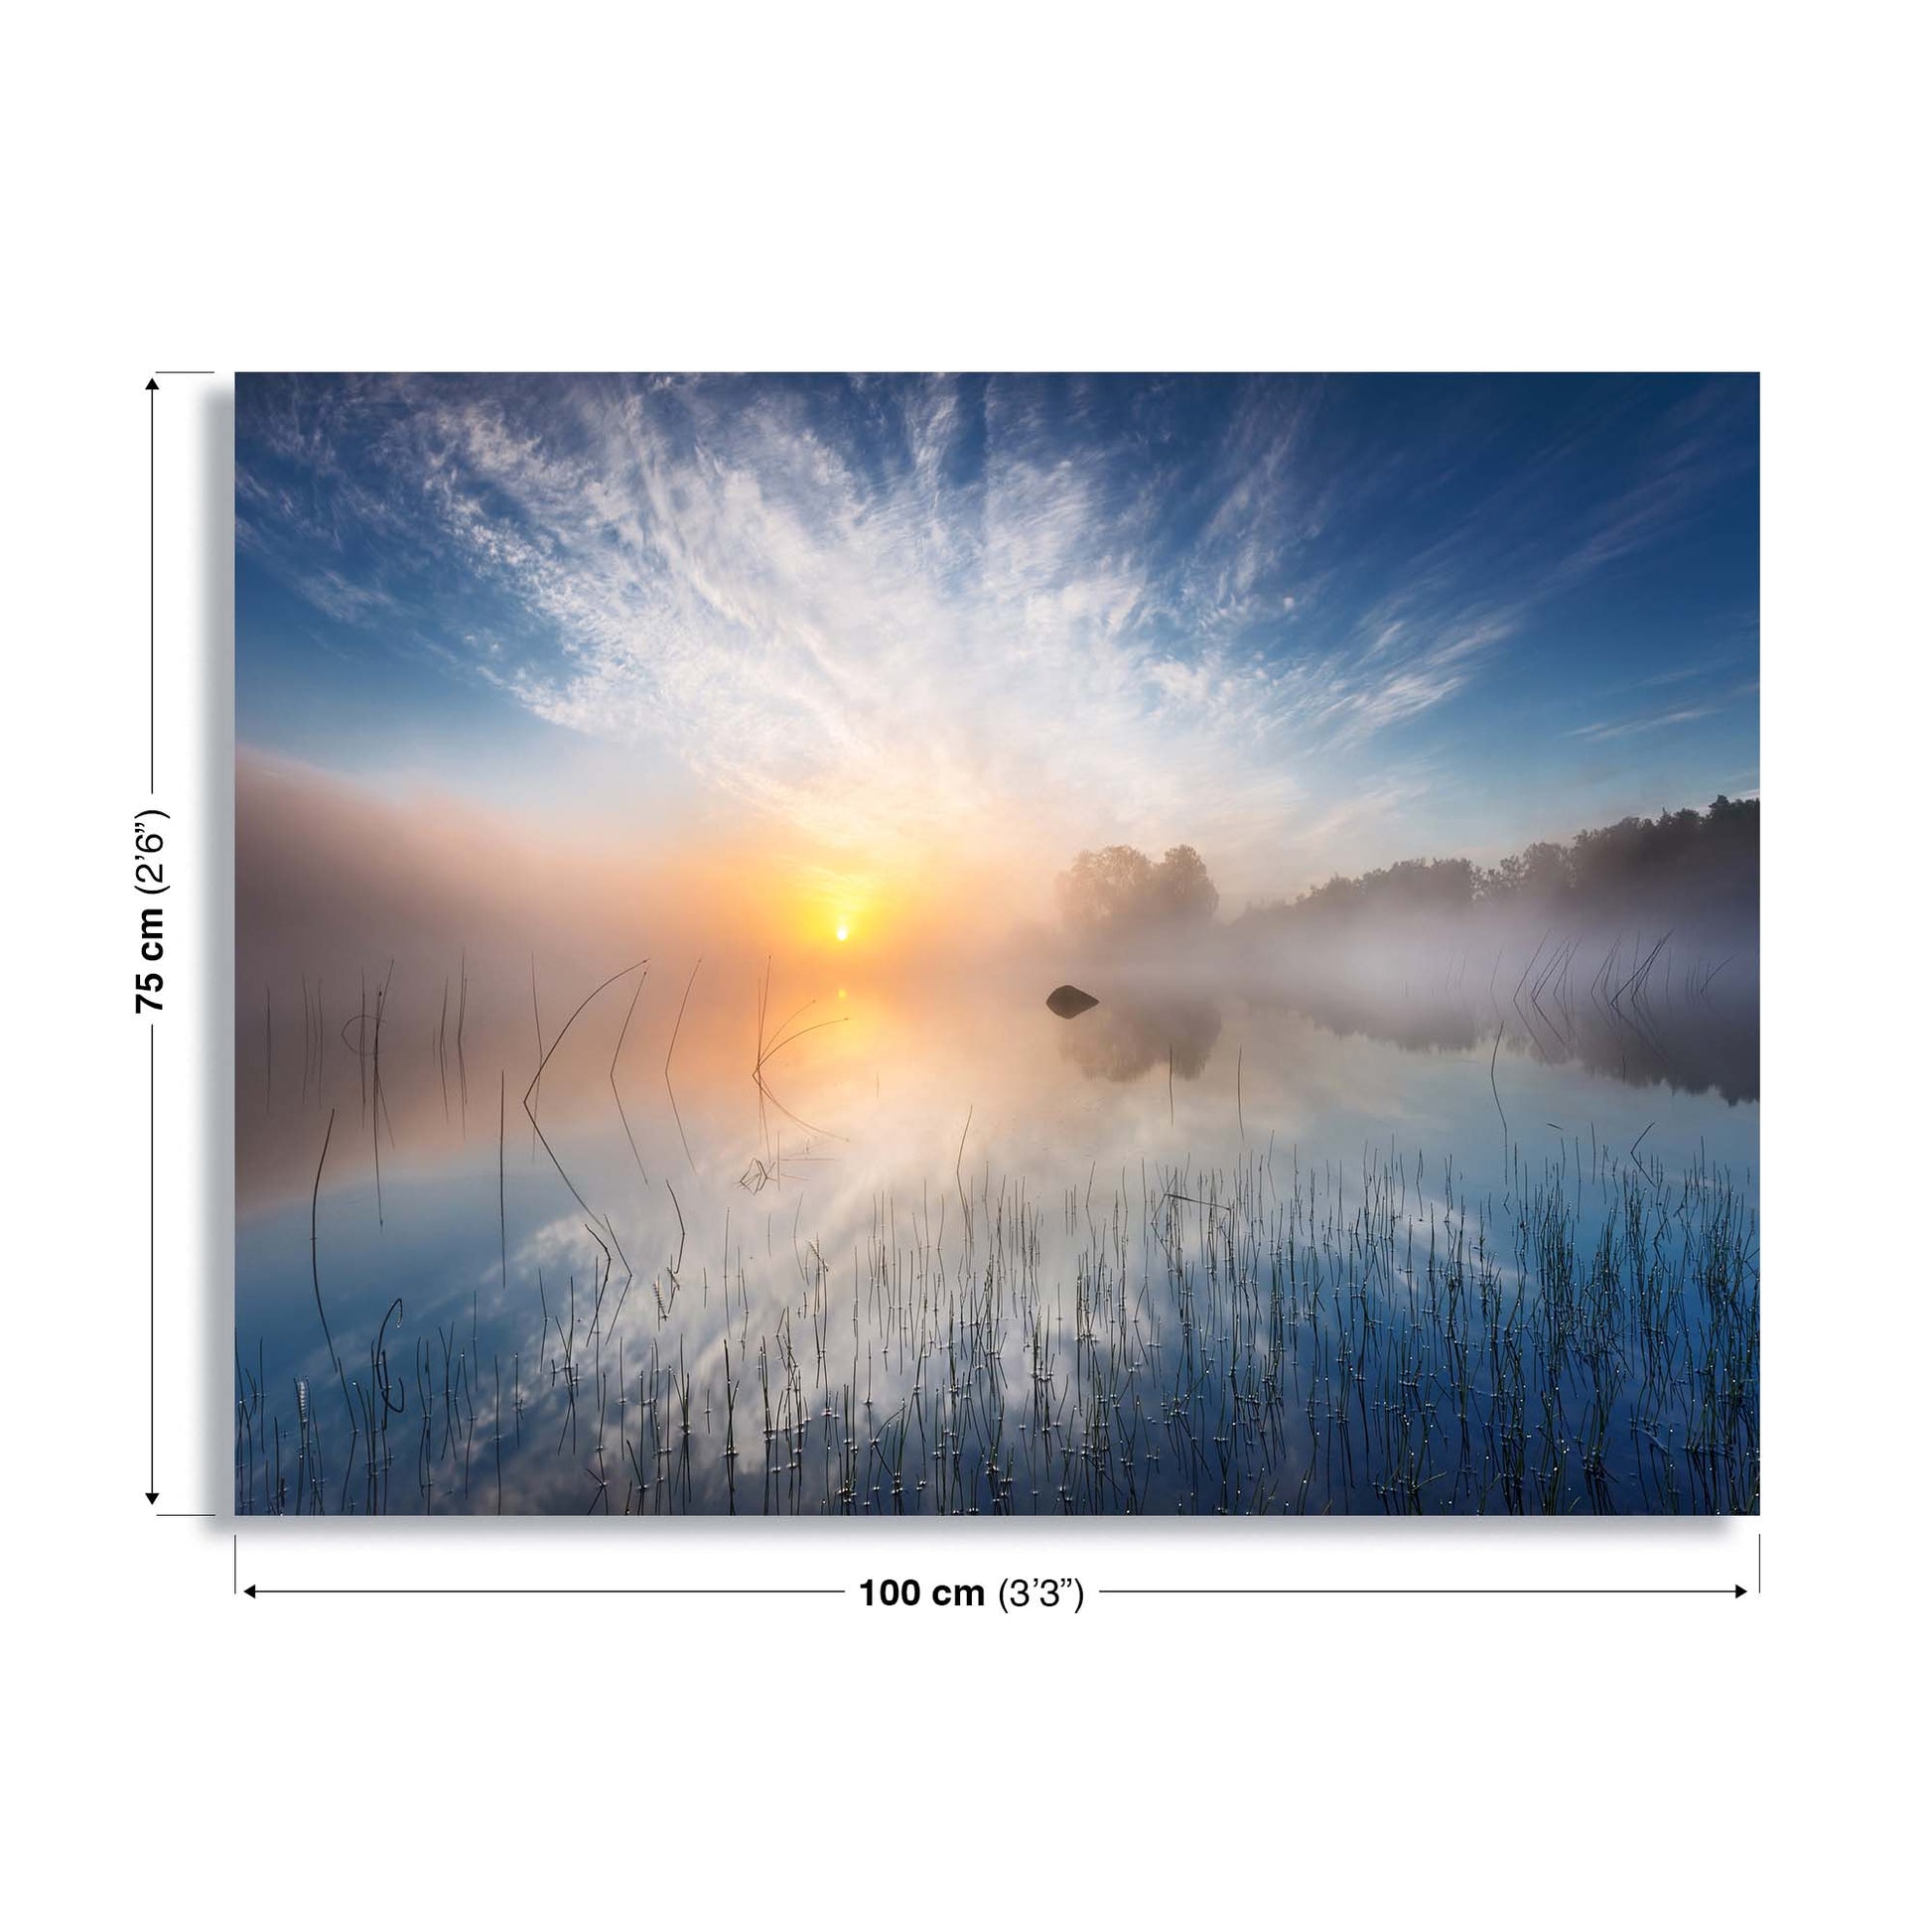 Reflection by Martin Lutz Canvas Print - USTAD HOME